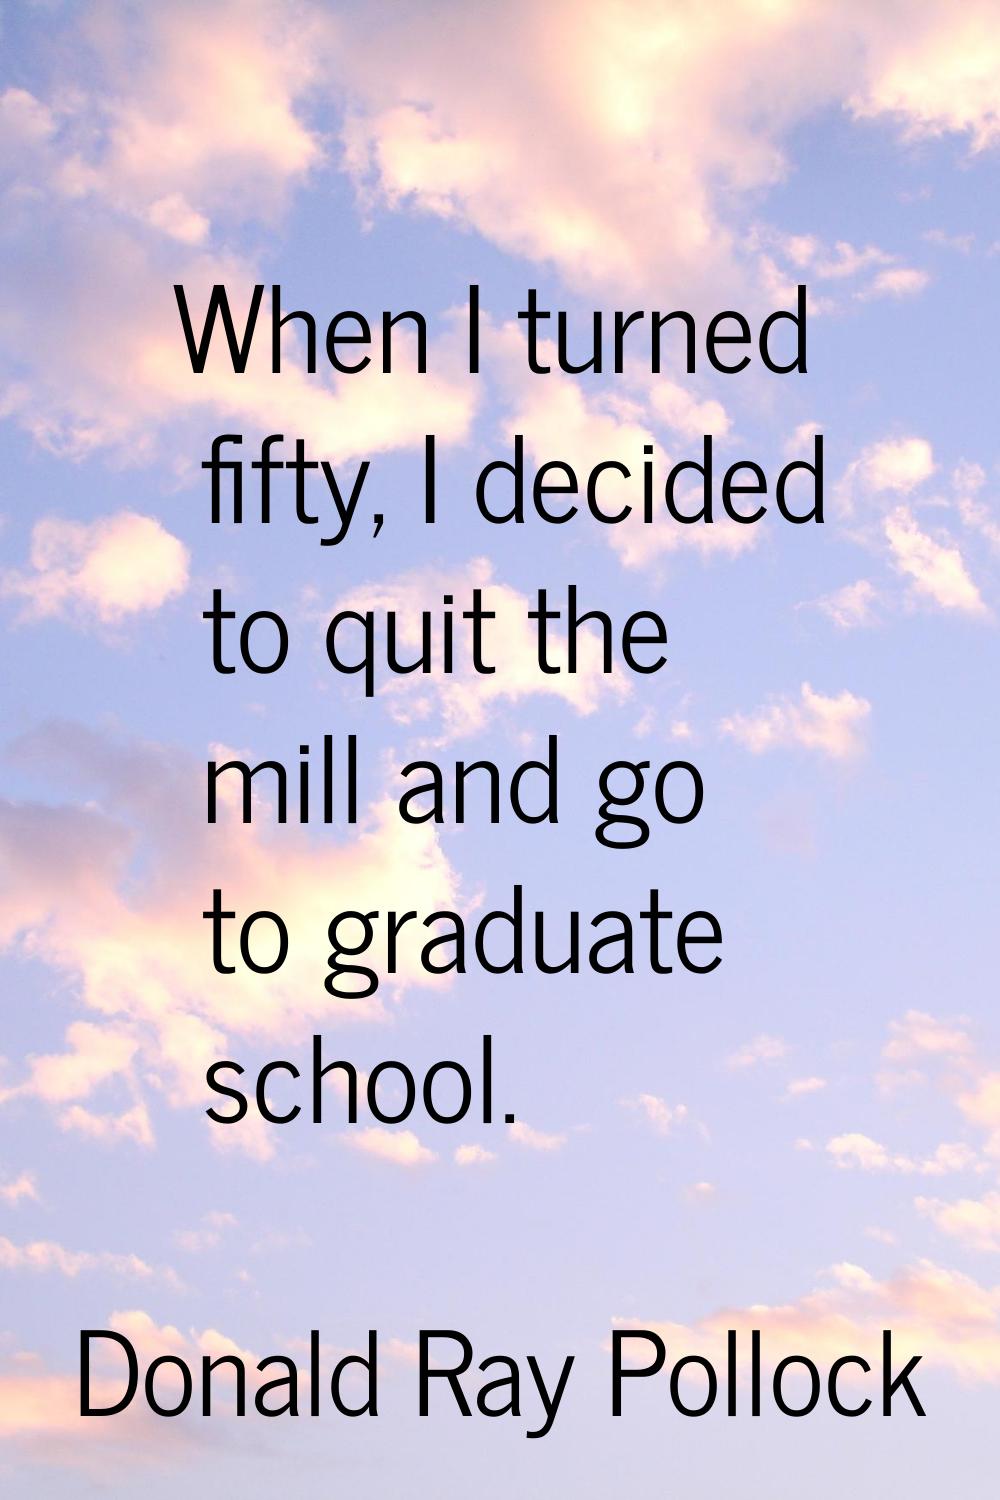 When I turned fifty, I decided to quit the mill and go to graduate school.